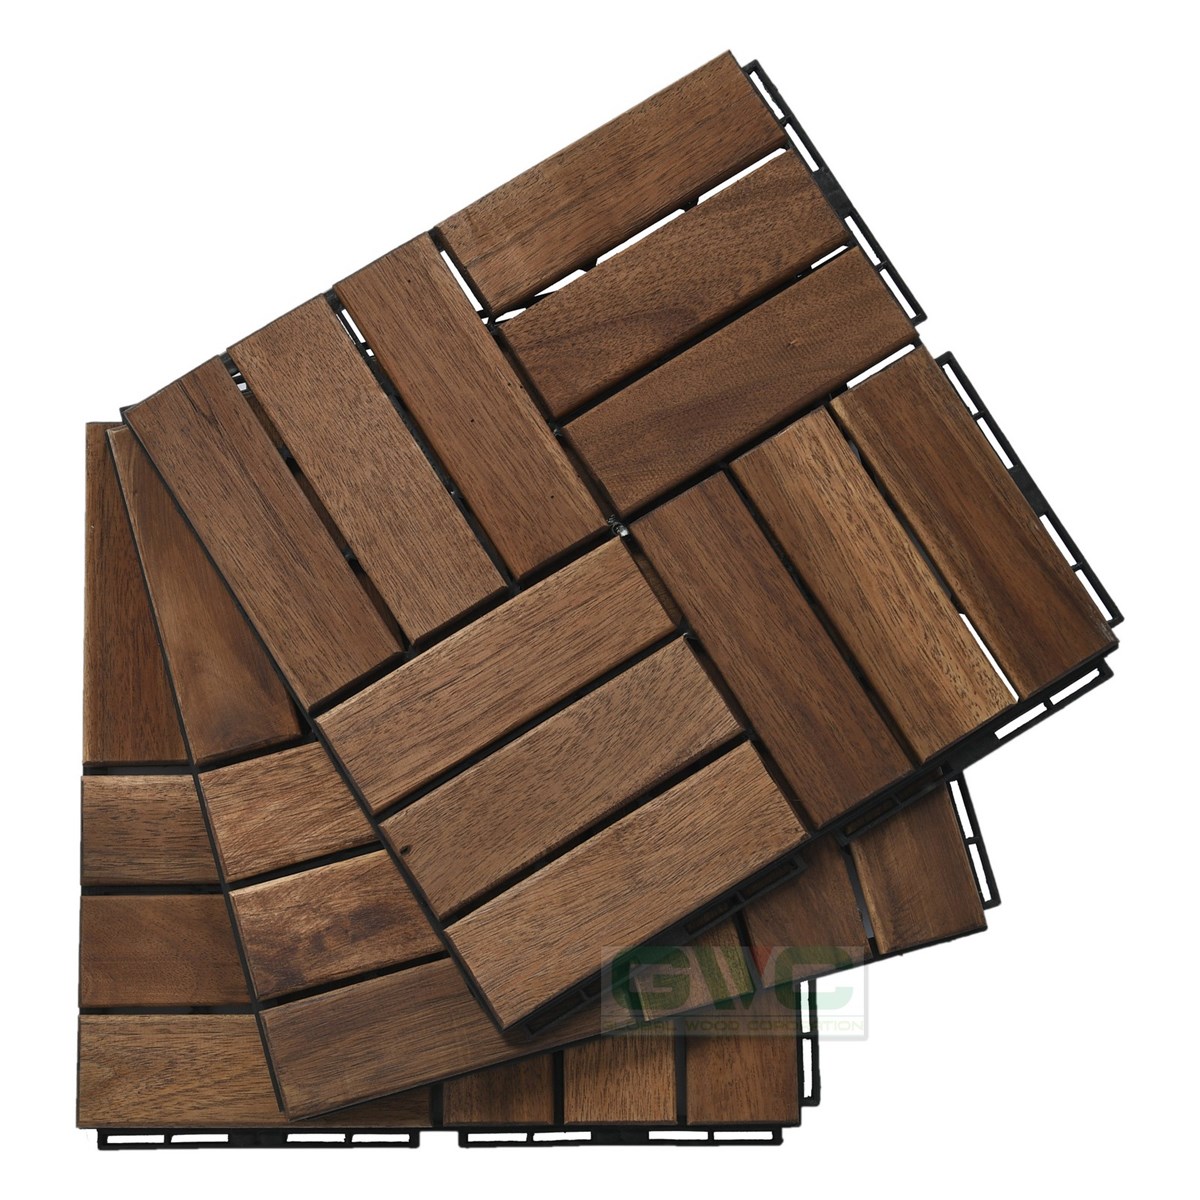 6 Slat Wood Solid Interlocking Deck Tiles with Pack of 10pcs from Vietnam